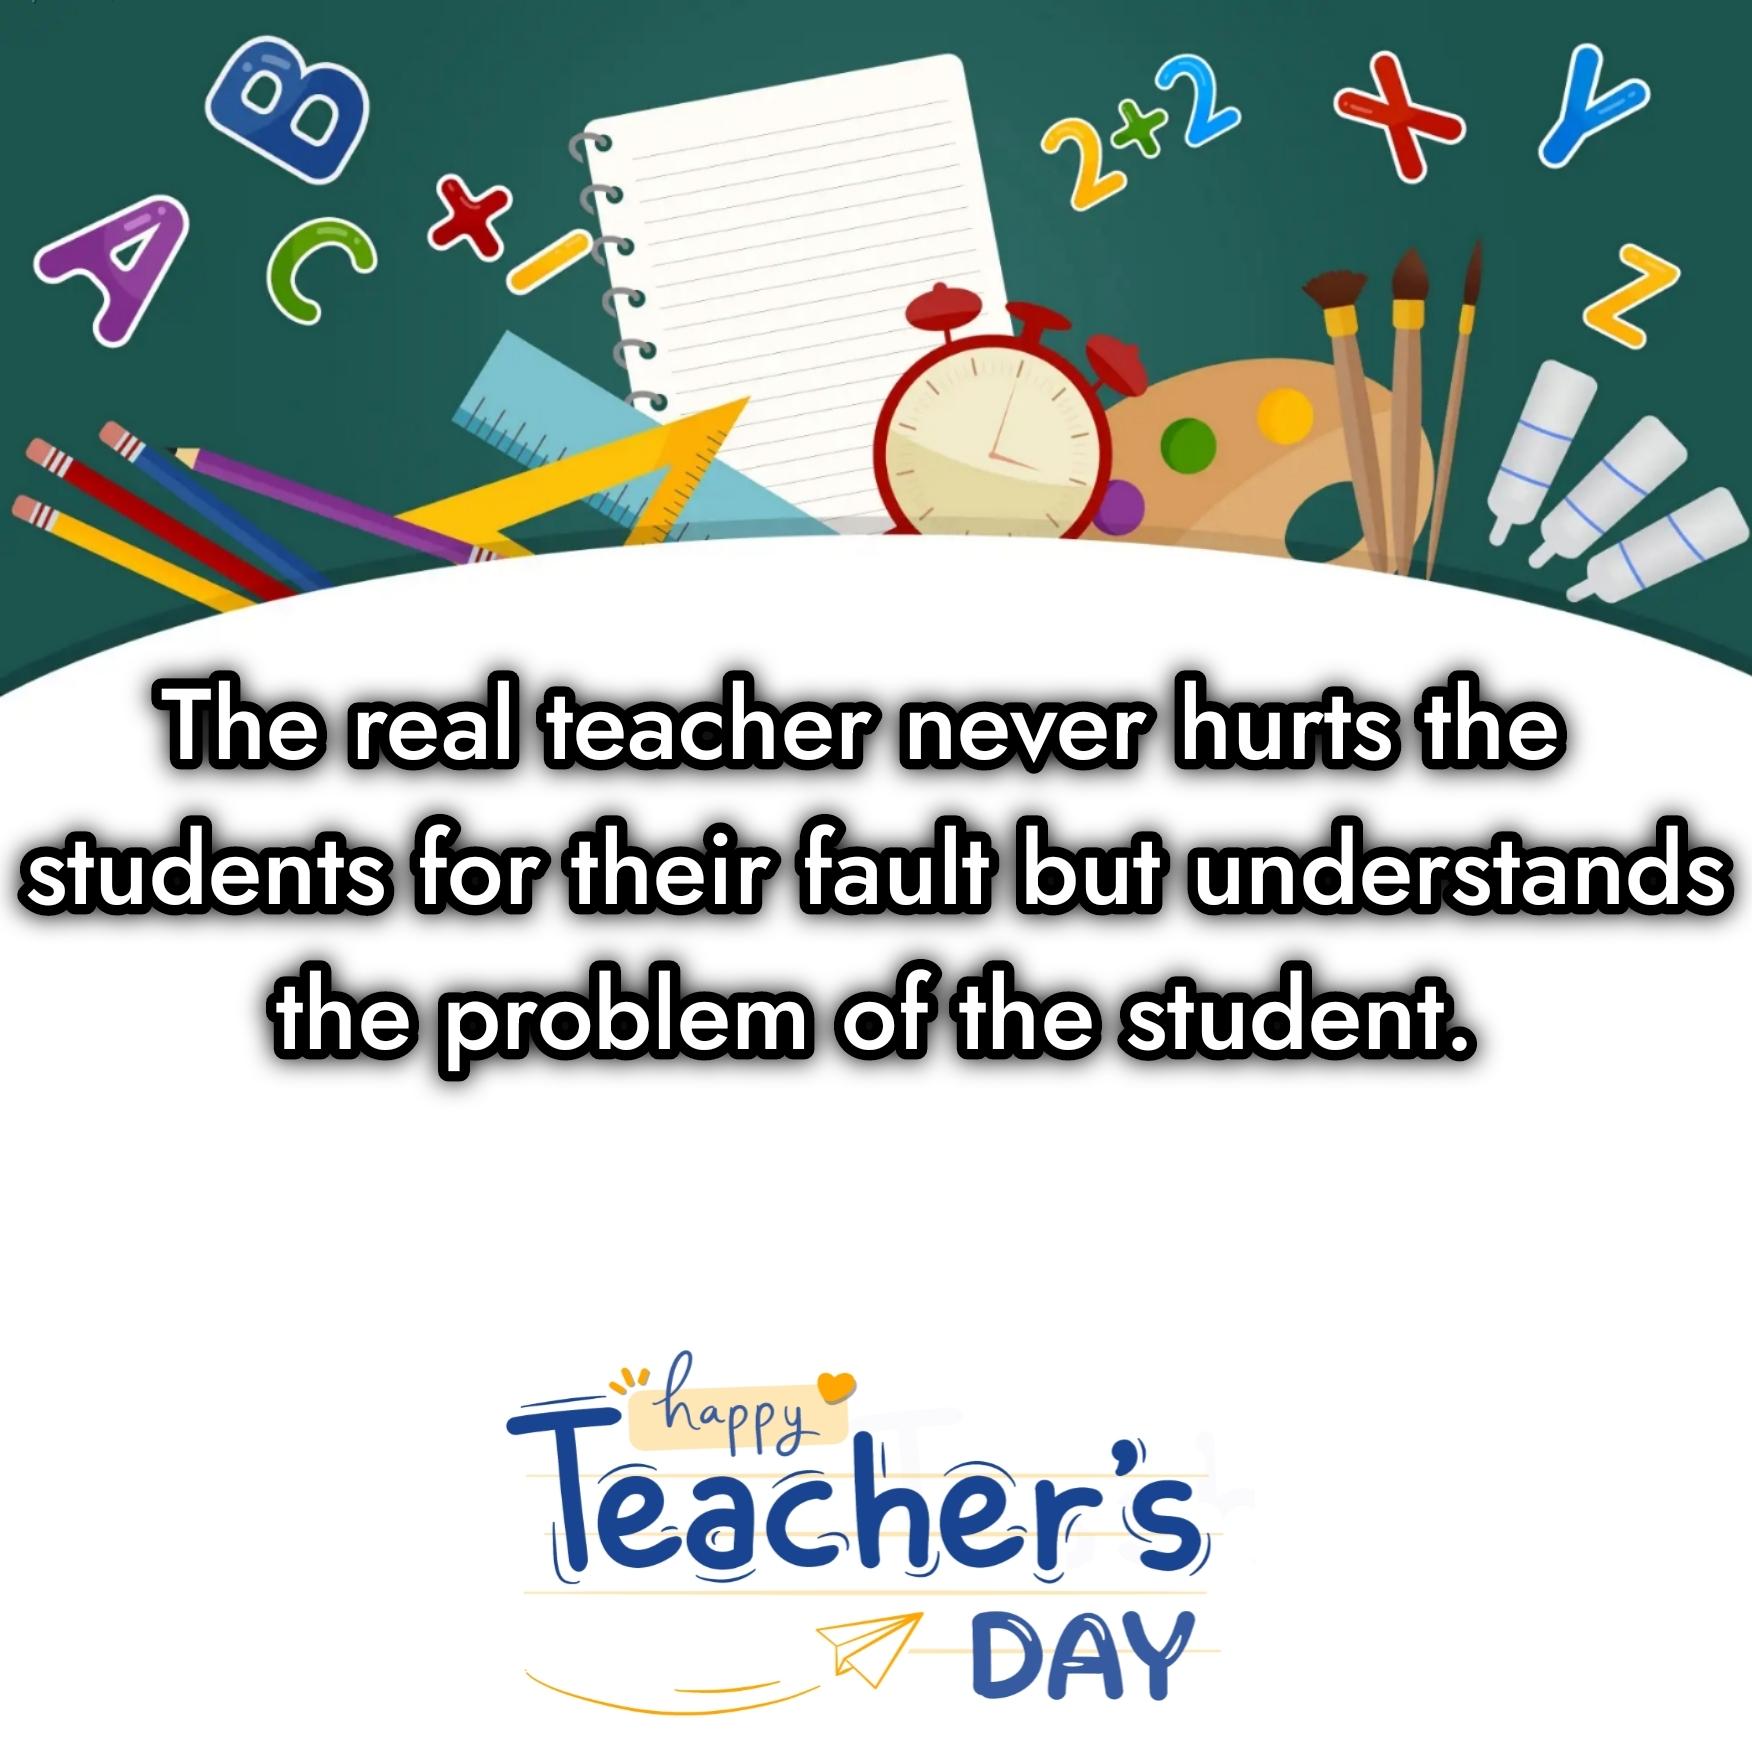 The real teacher never hurts the students for their fault